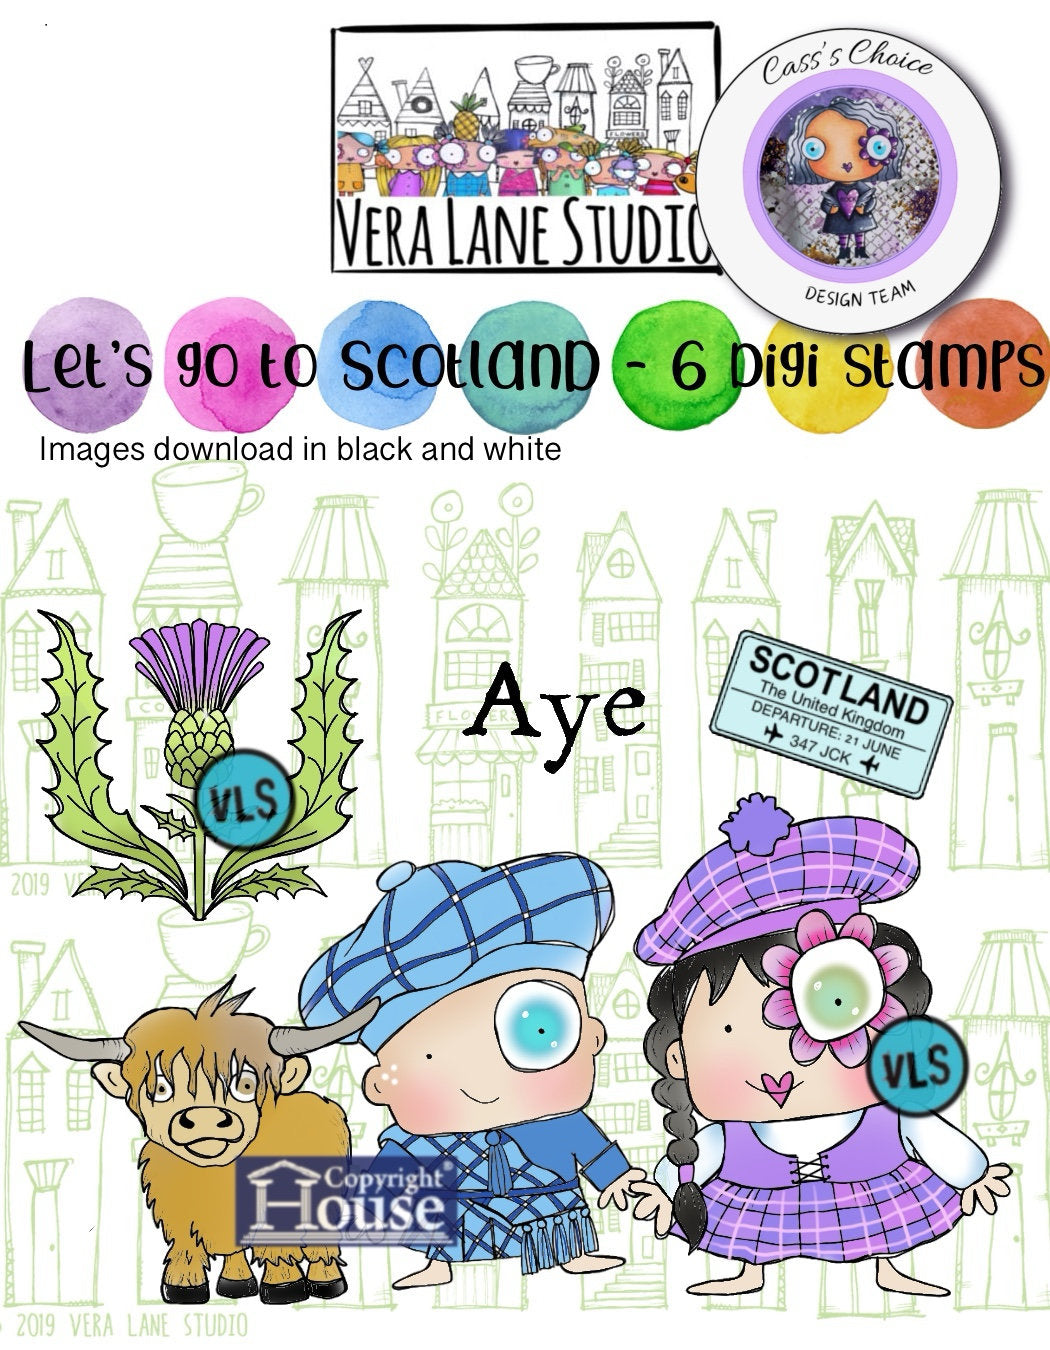 Let’s go to Scotland- 7 Digi stamp bundle in jpg and png files